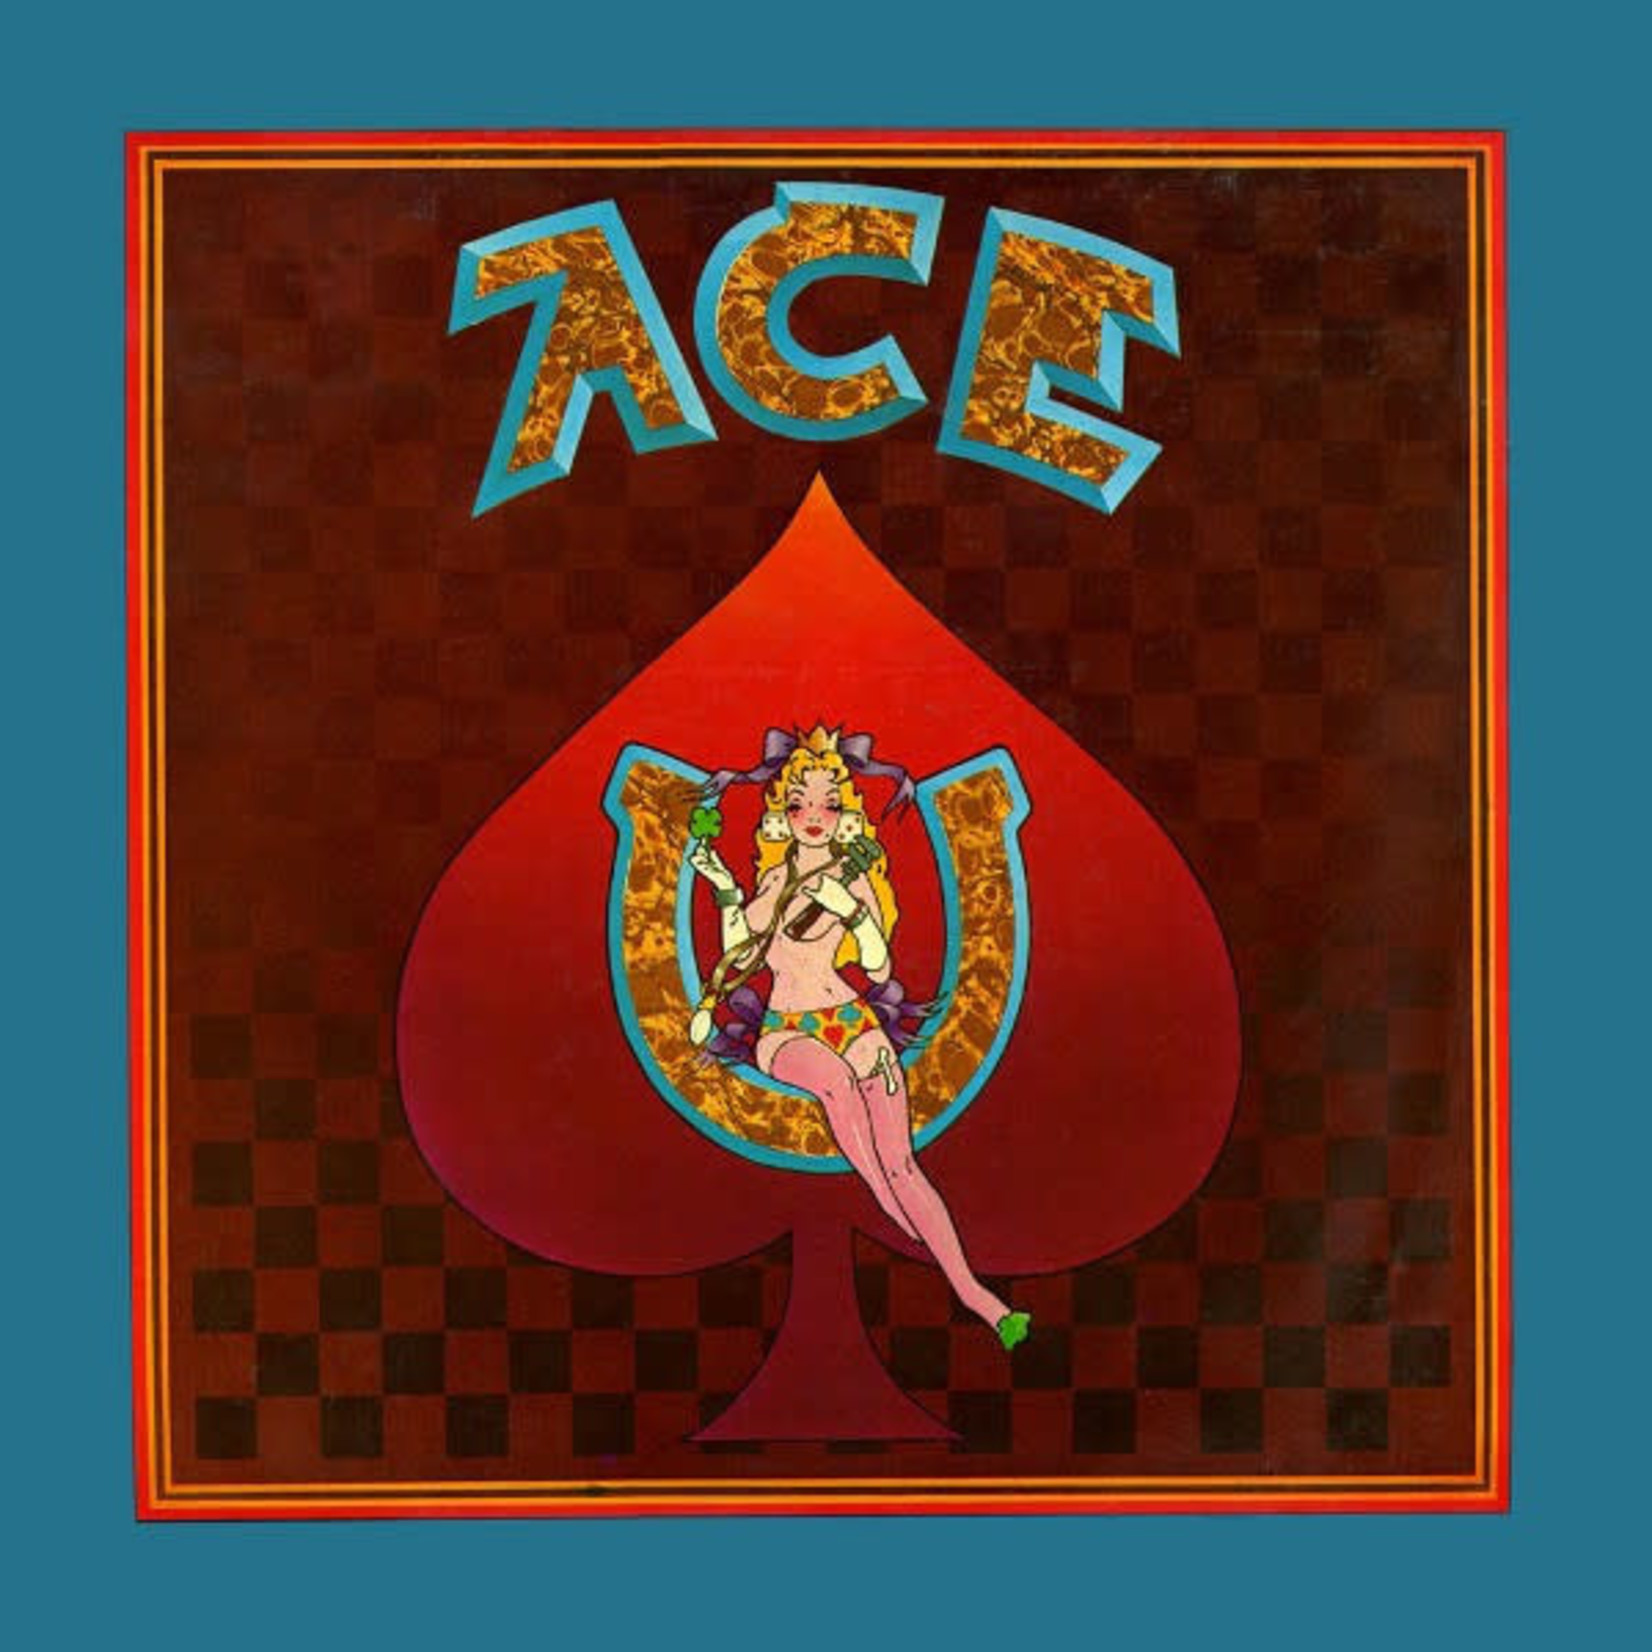 [New] Bob Weir - Ace (50th Anniversary, clear red vinyl, remastered, indie exclusive)